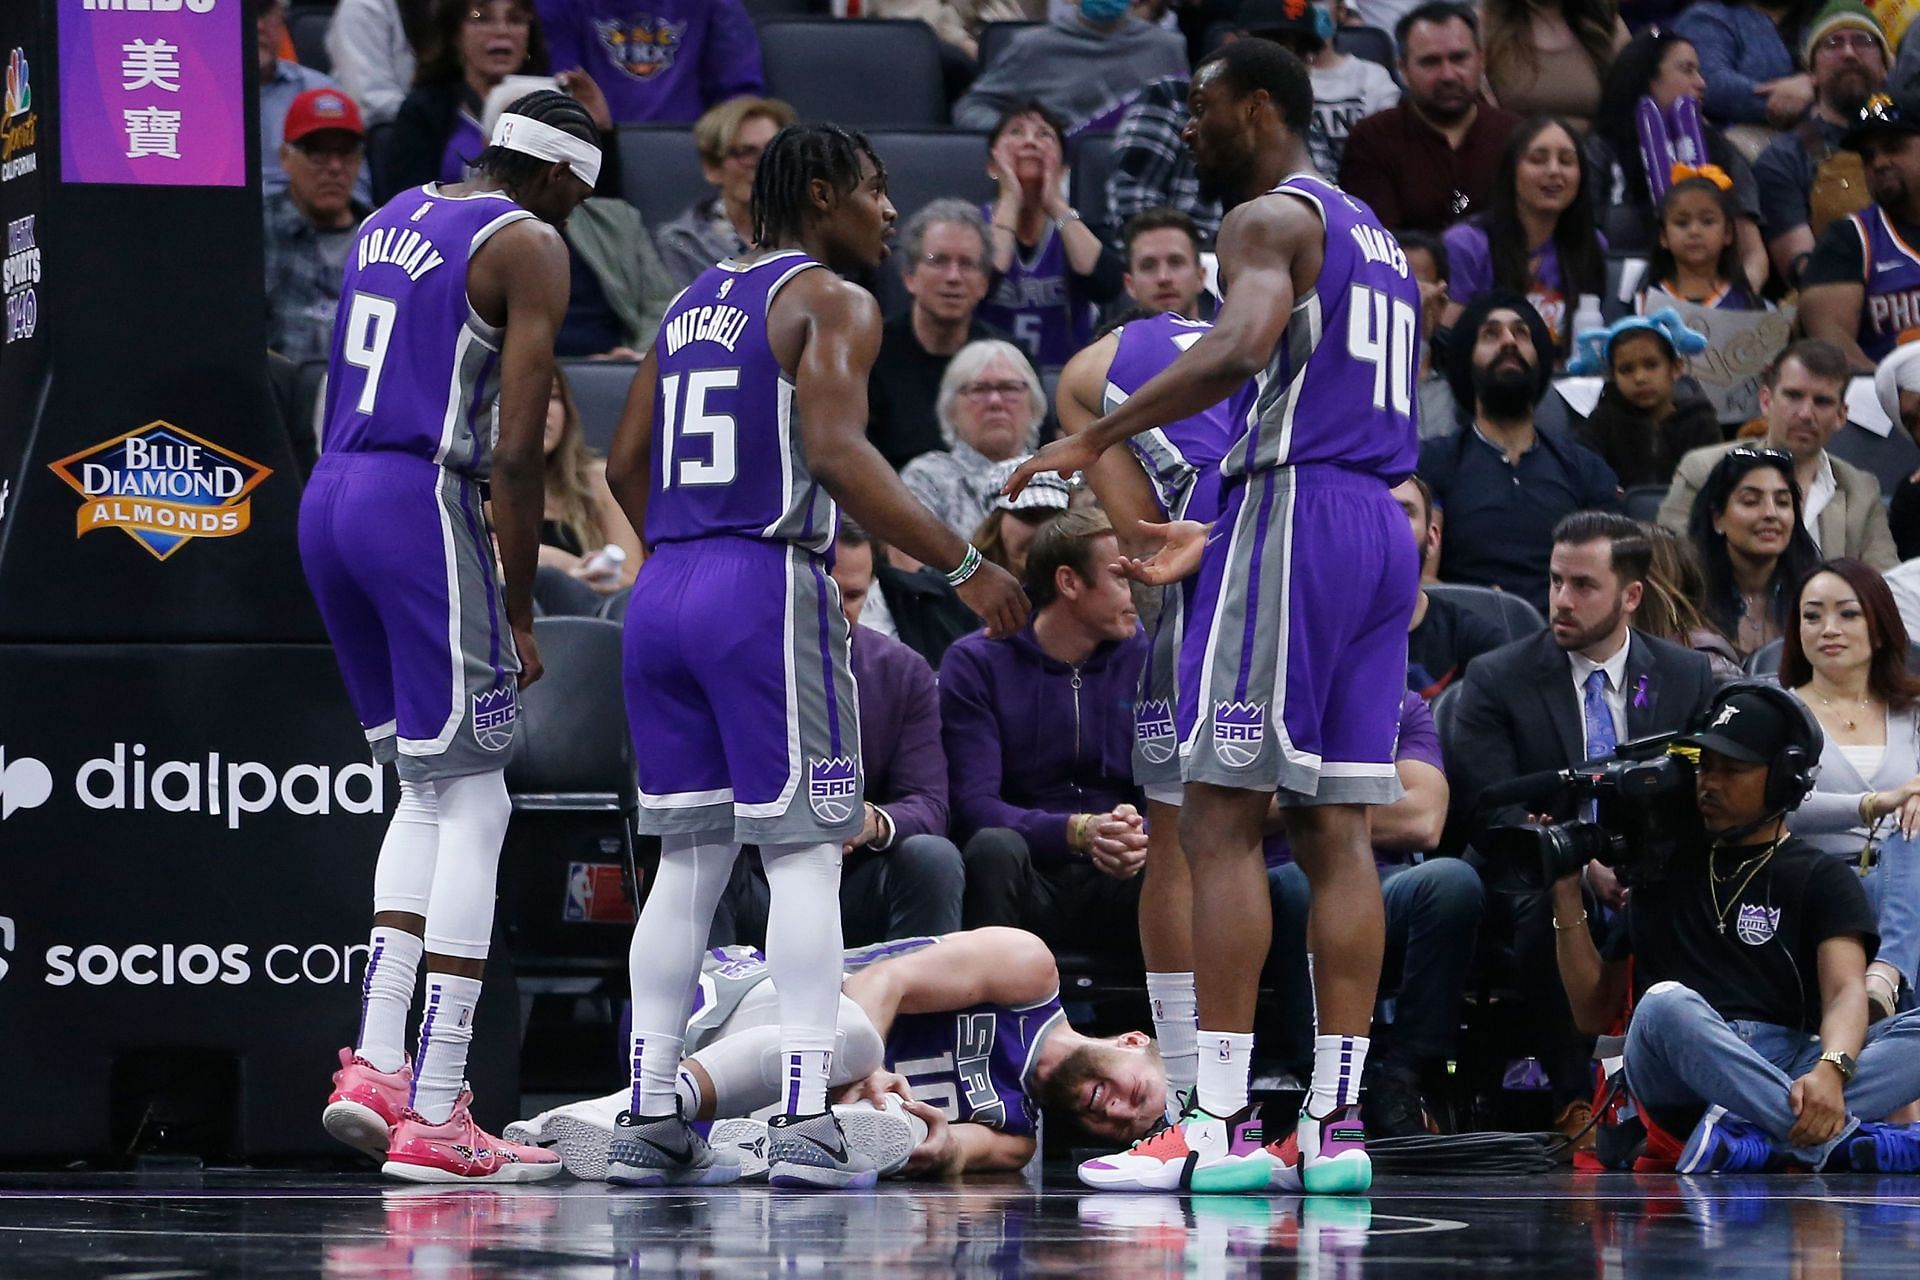 The current status of the Kings prompted NBA fans to find a way to fix the team for young players.